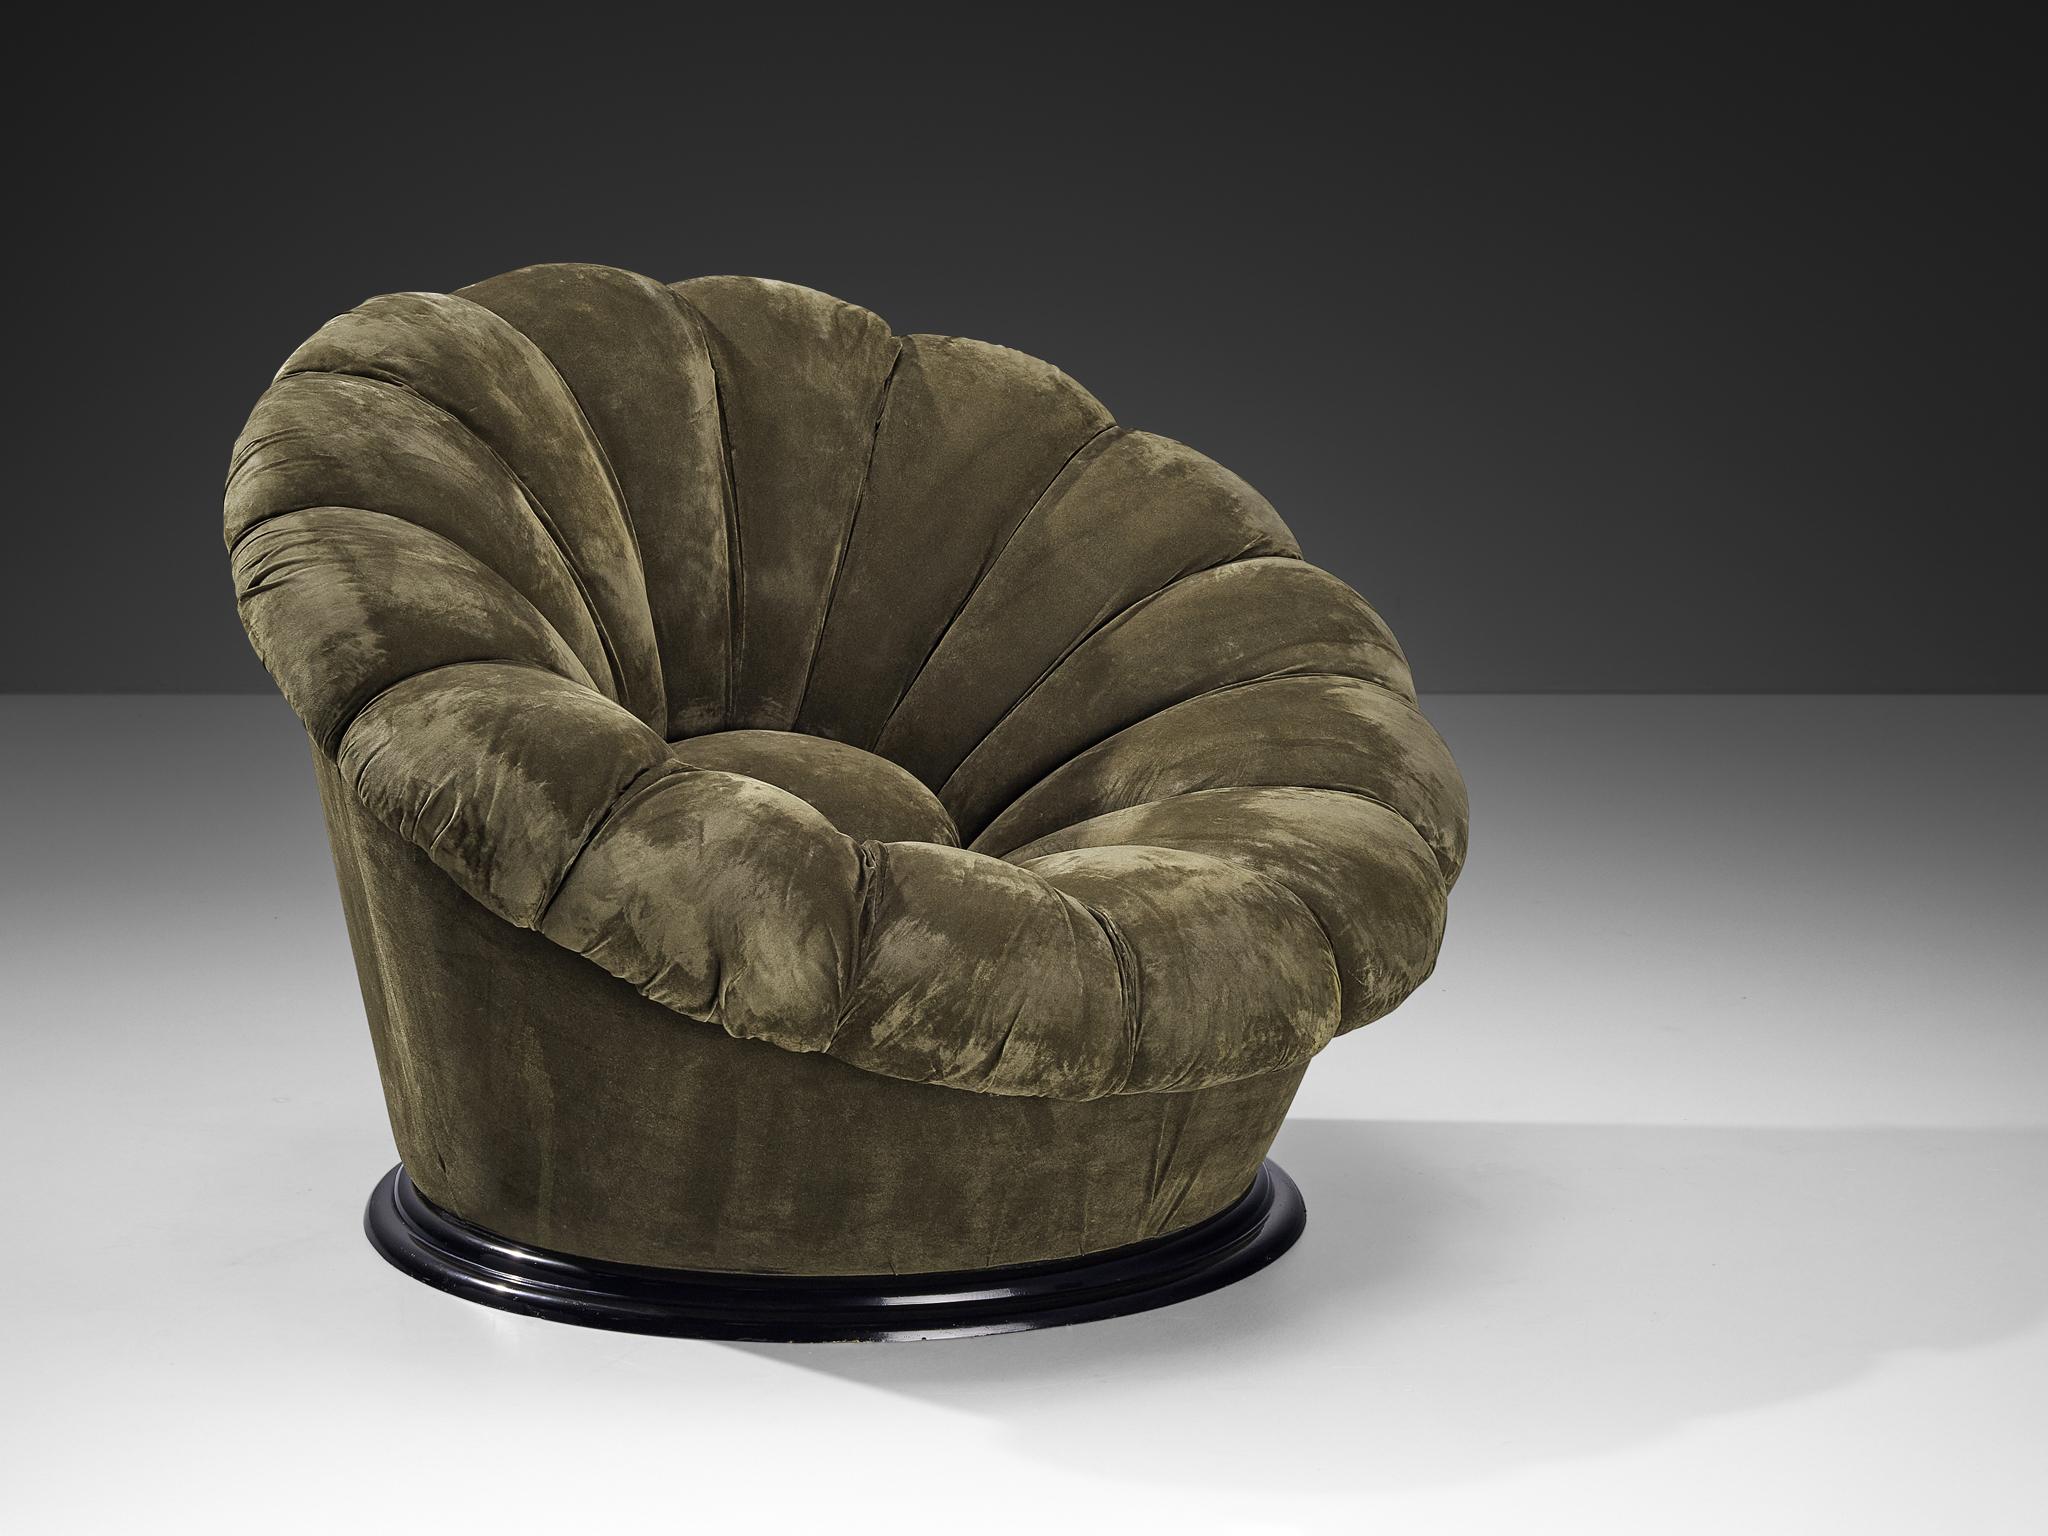 Lounge chair, velvet, plastic, Italy, 1970s

Eccentric lounge chair of Italian origin. The design reminds of the anatomy of the flower with its inward-facing tufted lines and the stuffed round centre. The whole unit is executed in a soft khaki green